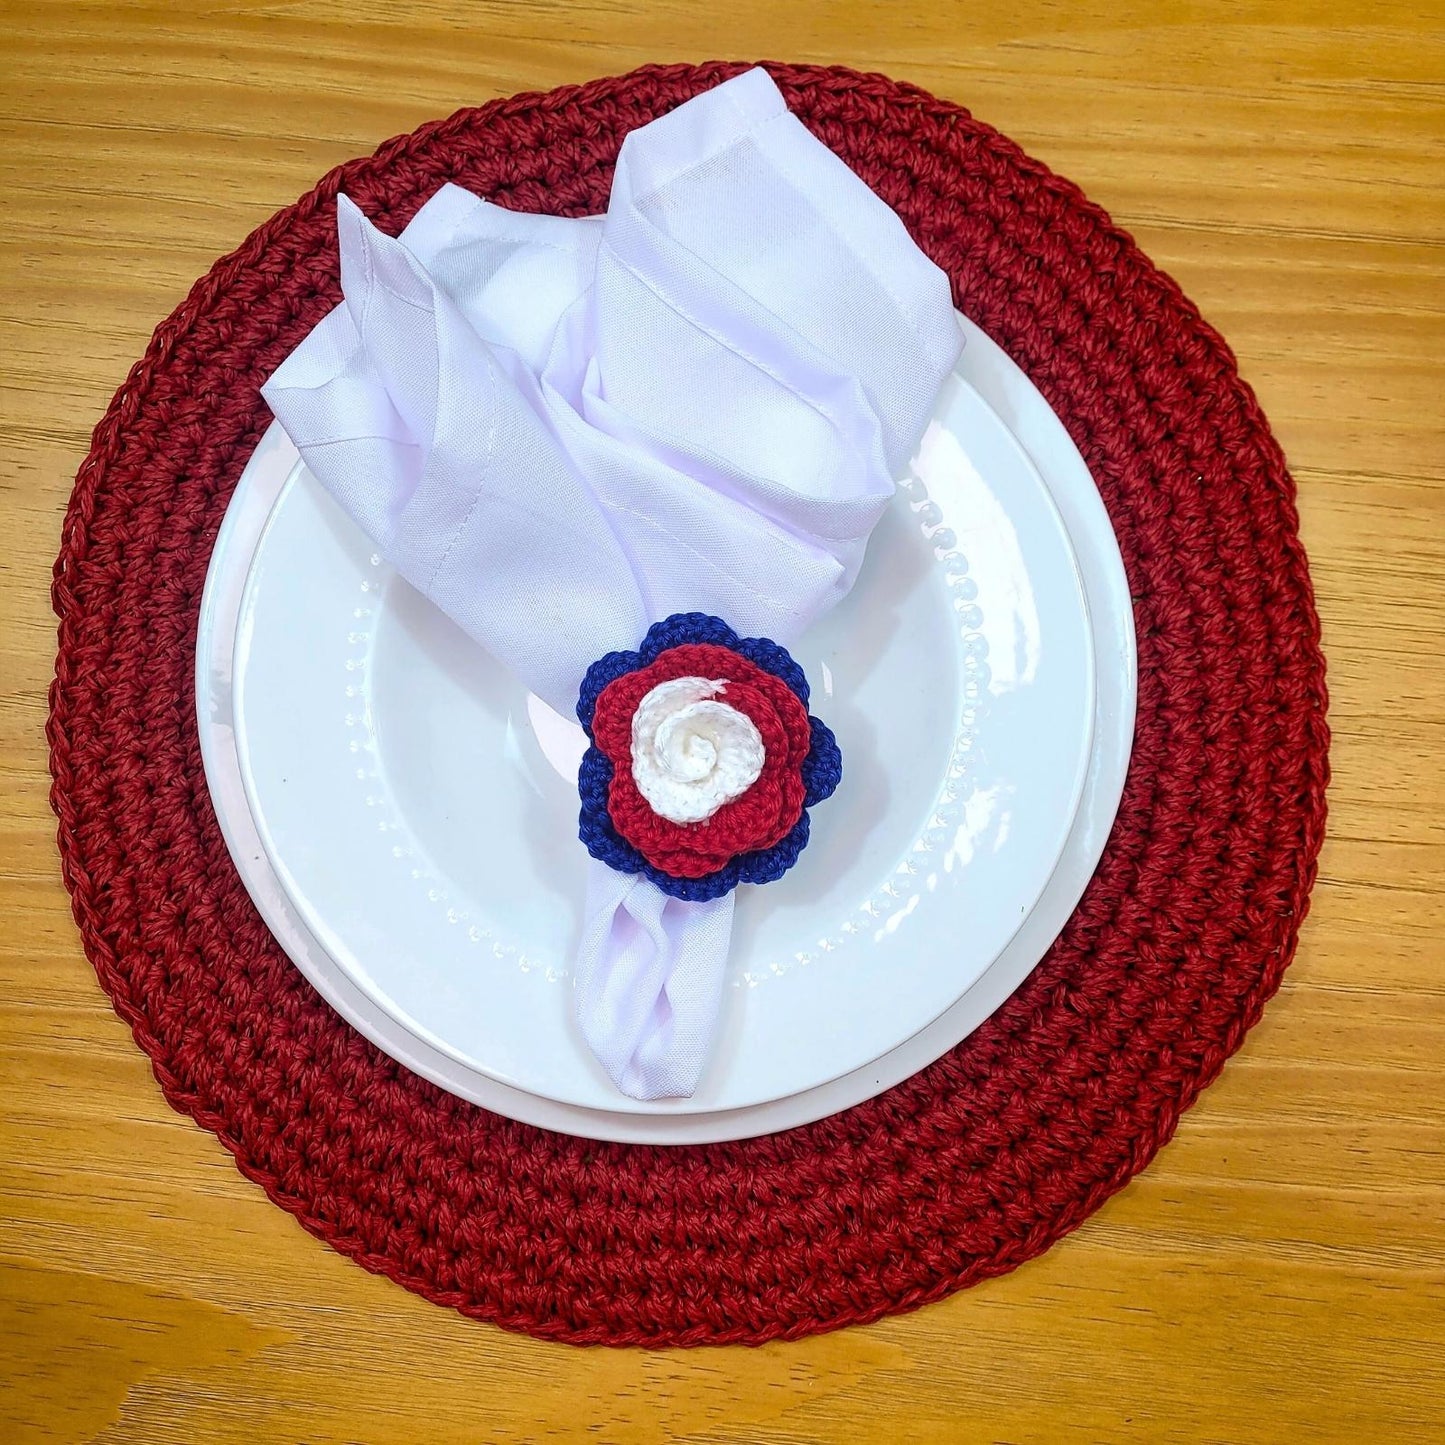 Charlo's Set of 6 USA Patriot Crochet Rosebud Napkin Rings for Independence Day, 4th of July, Memorial Day